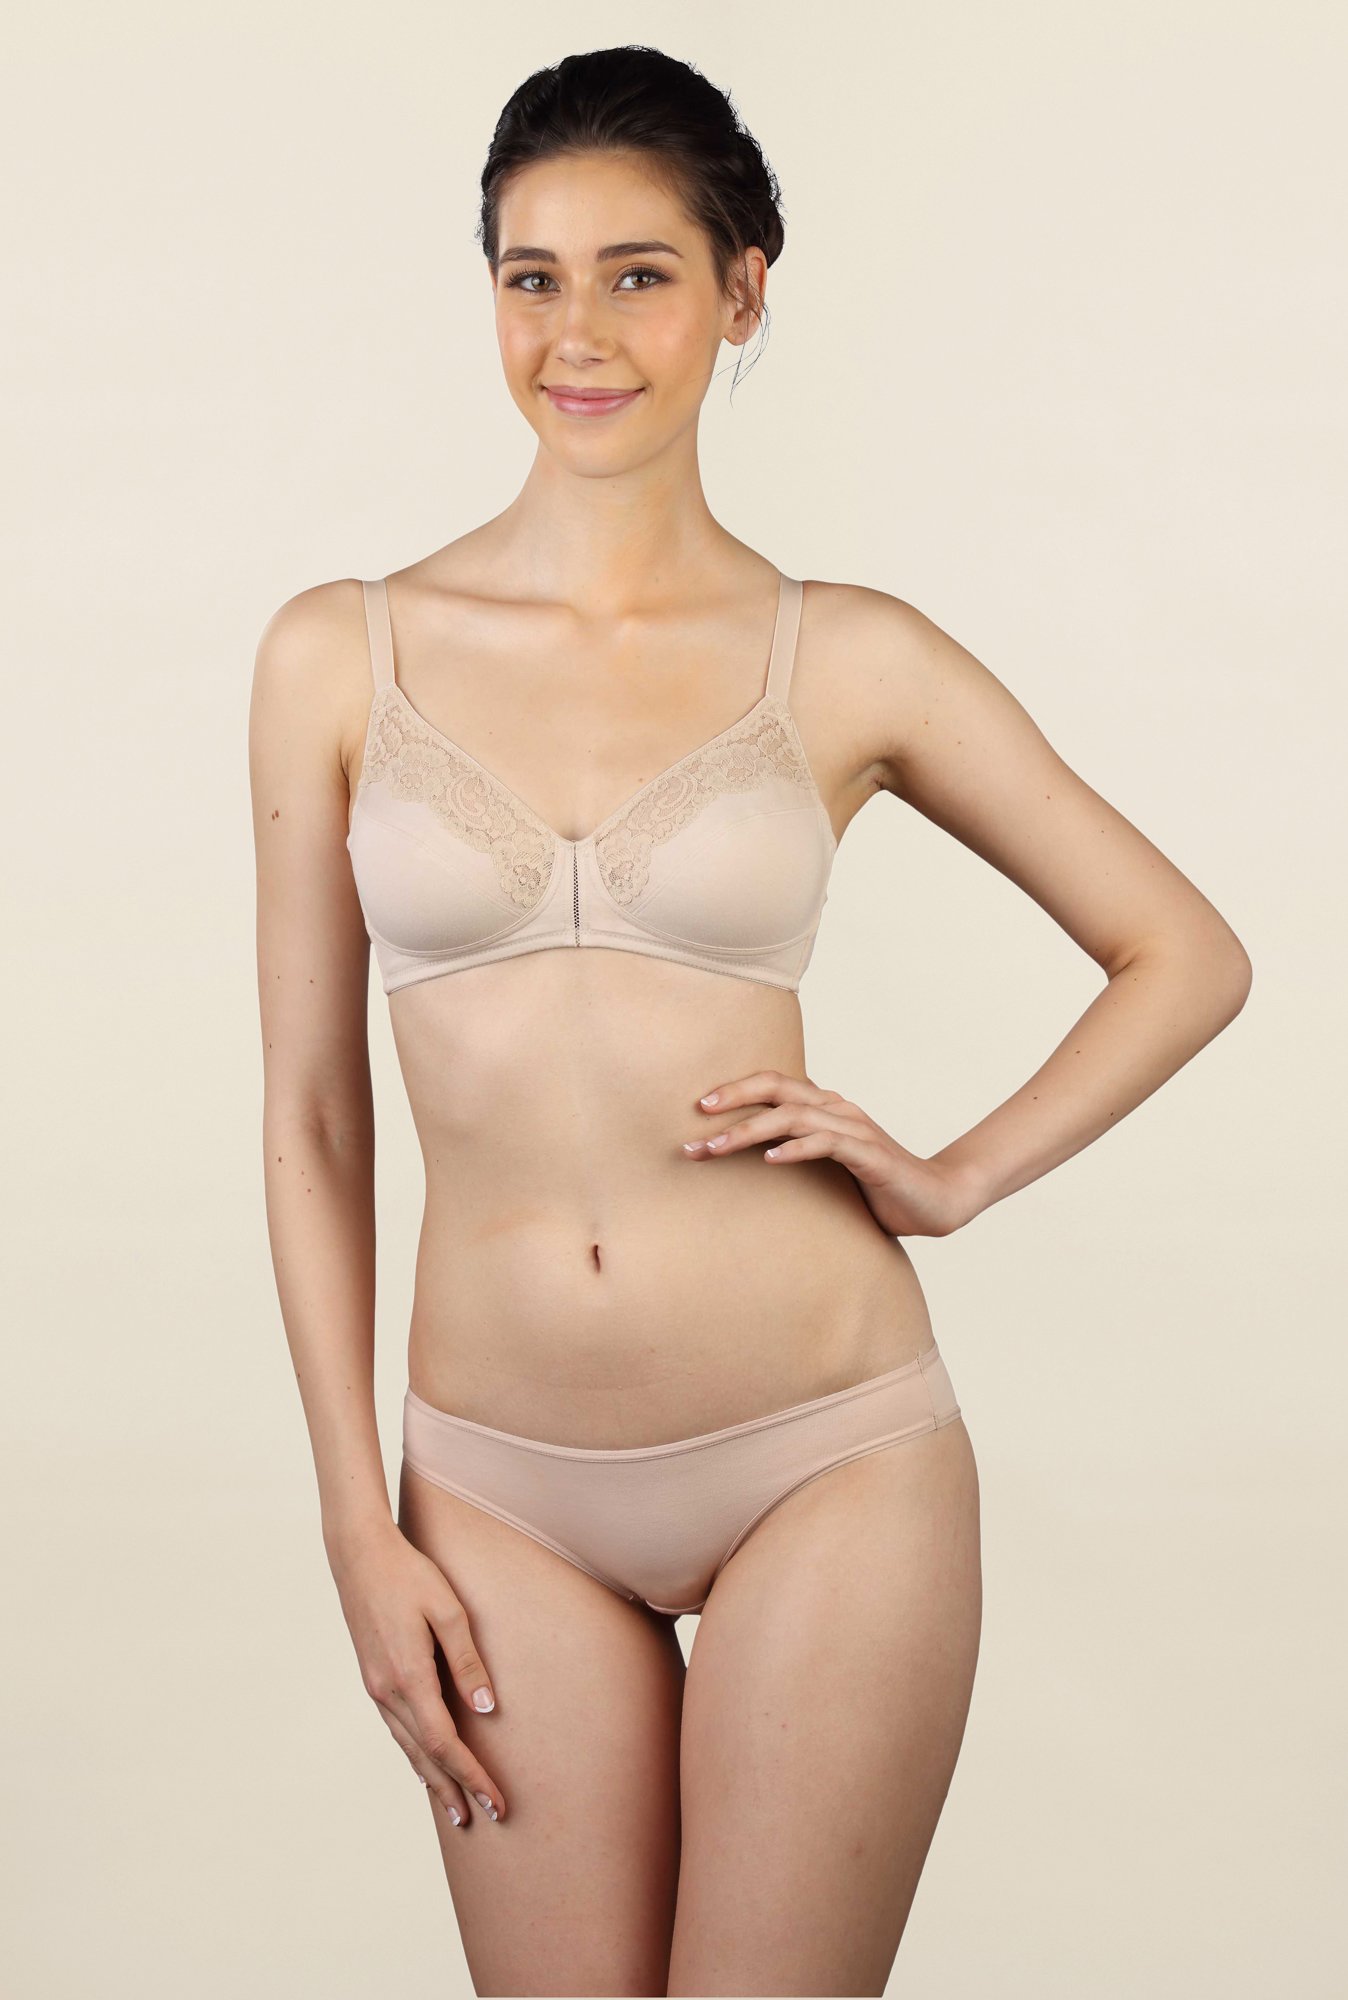 Triumph Formfit Full Cup Bra Non-Wired Non-Padded Affordable Bras 10166789